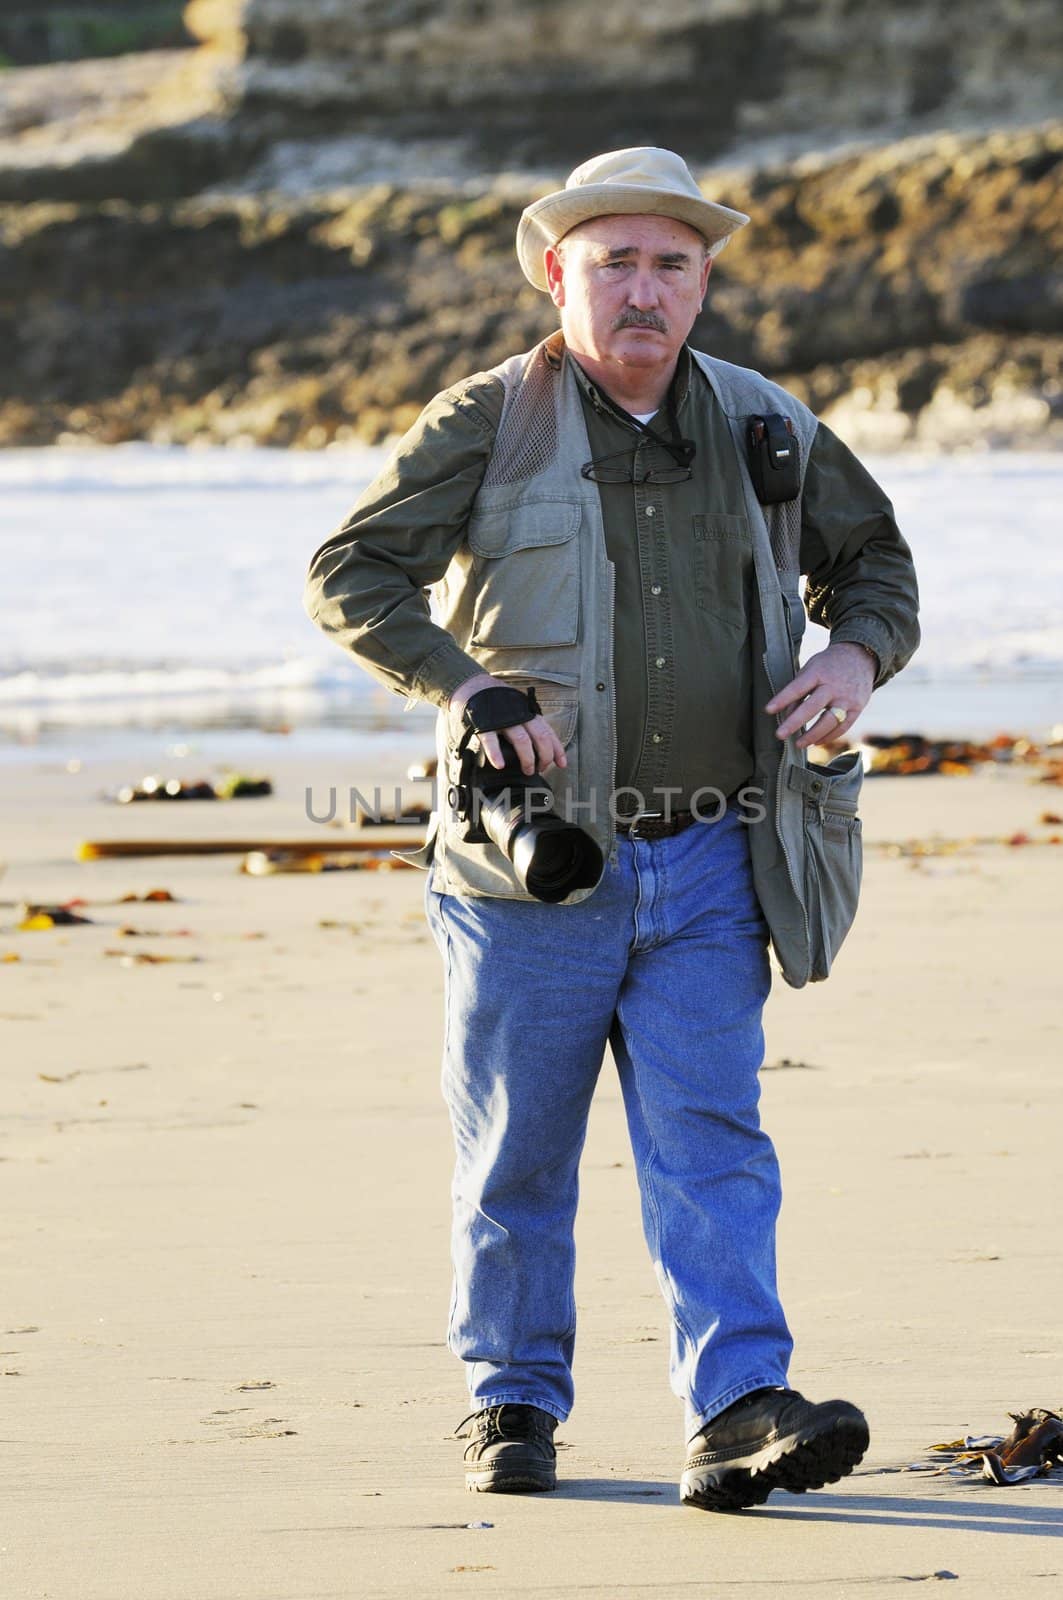 Photographer walking along the beach looking for subjects, becomes the subject of another photographer